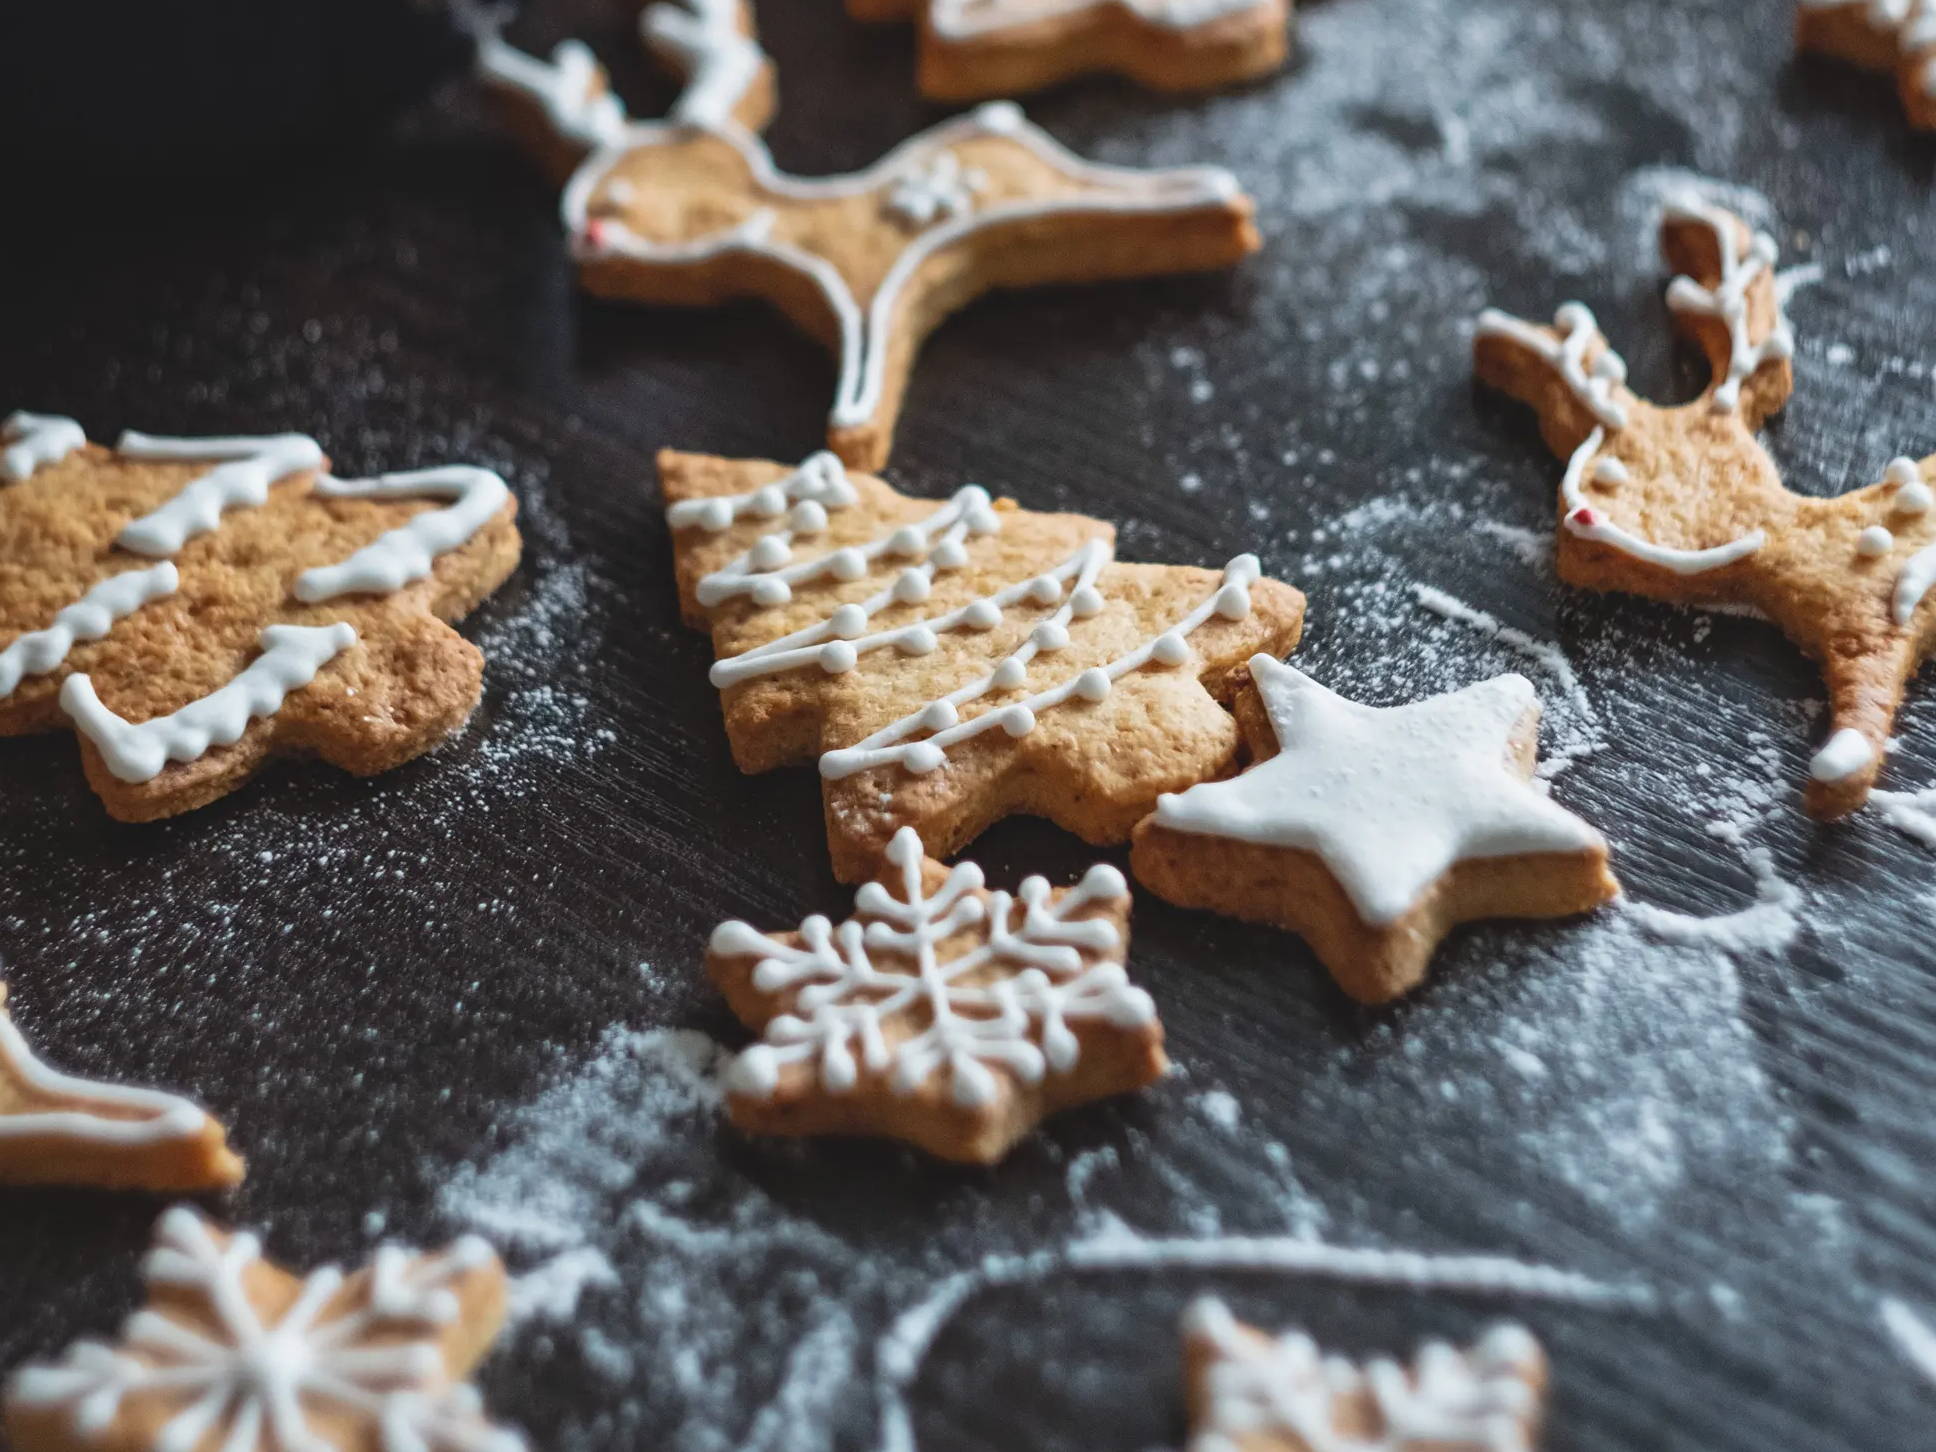 Iced and decorated gingerbread cookies on a counter dusted with flour